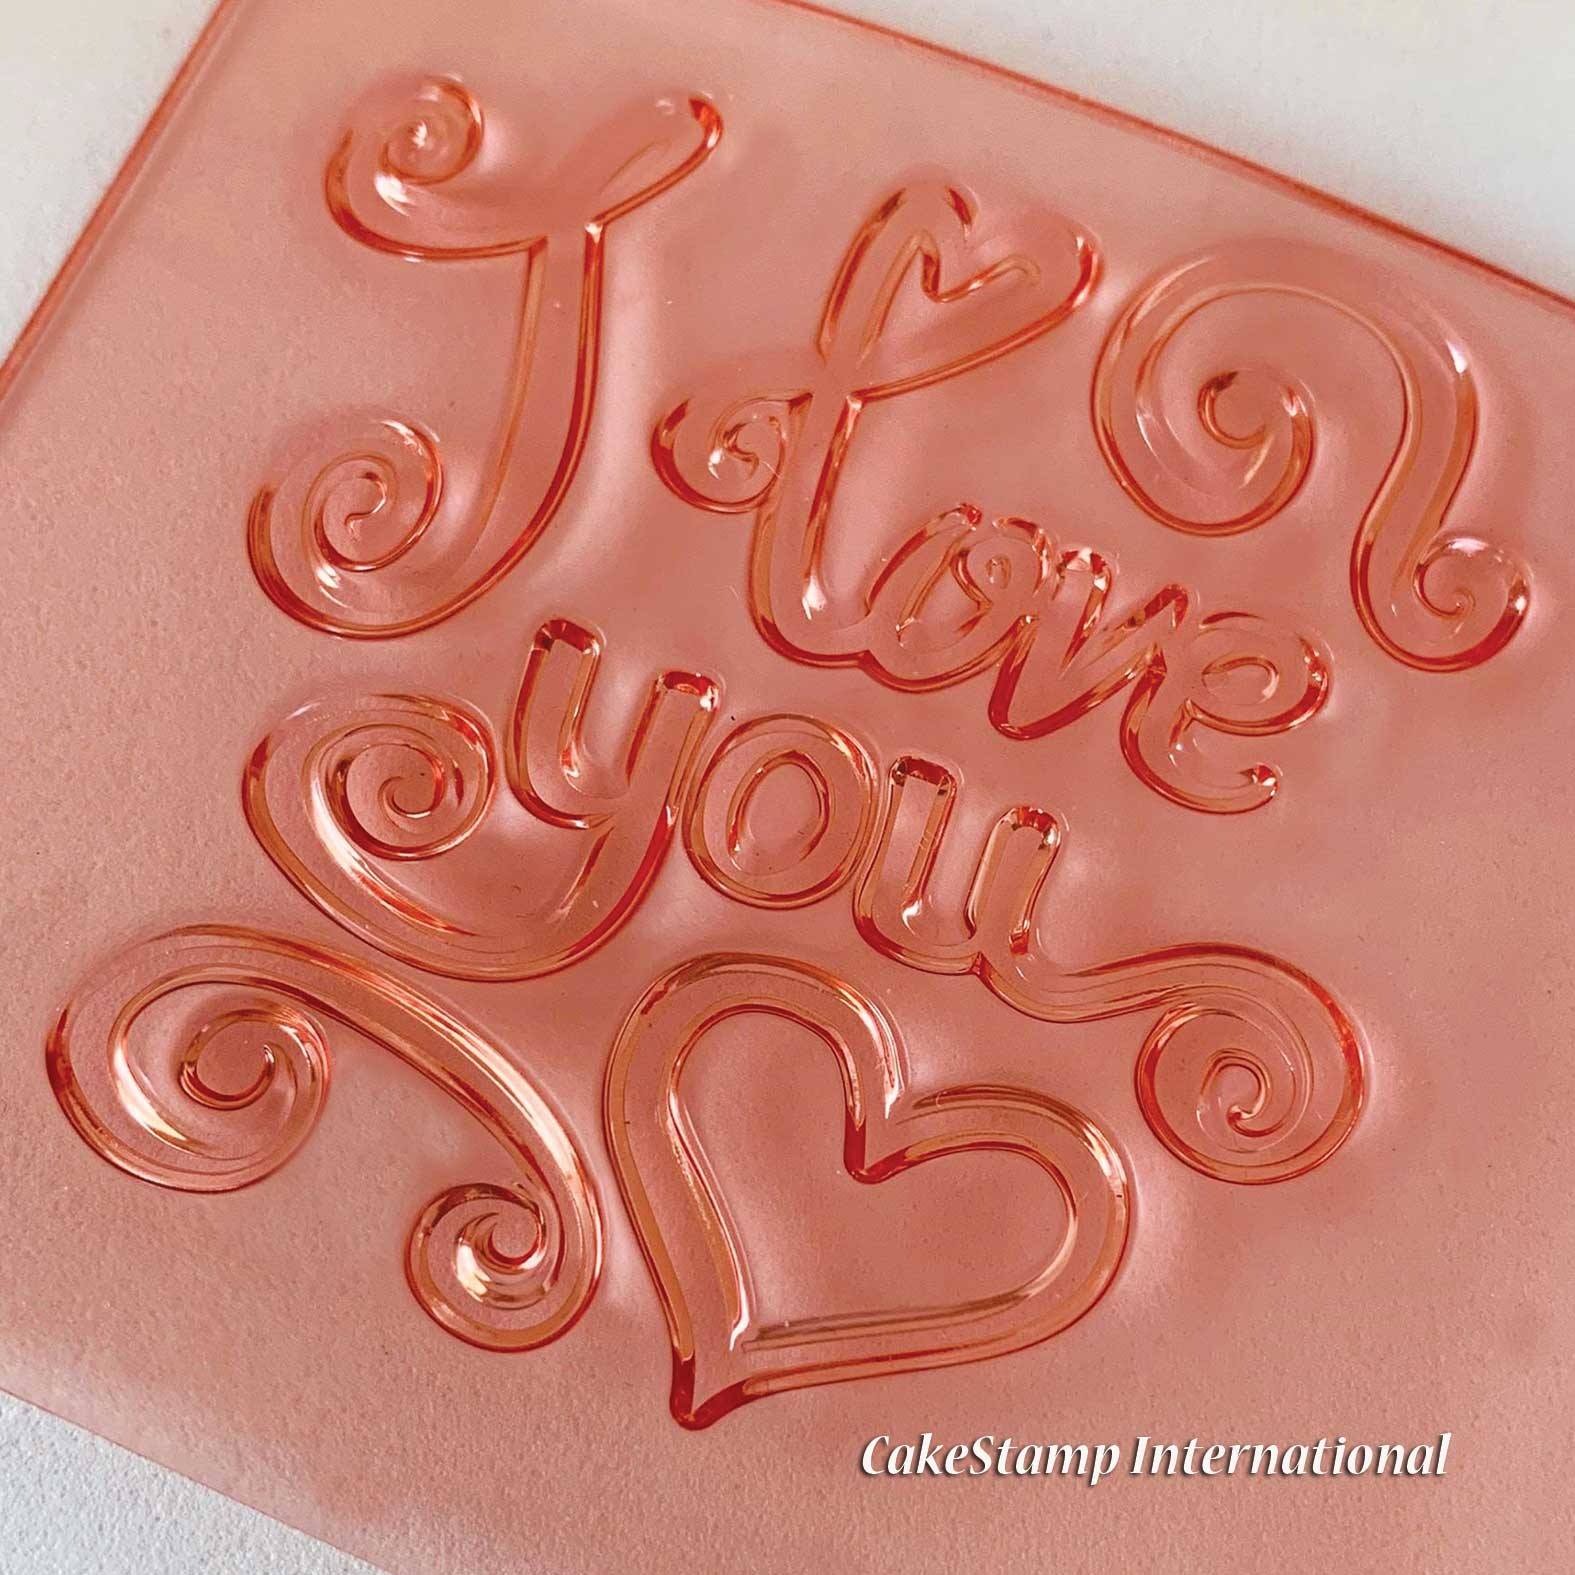 I love you- valentines day- stamp